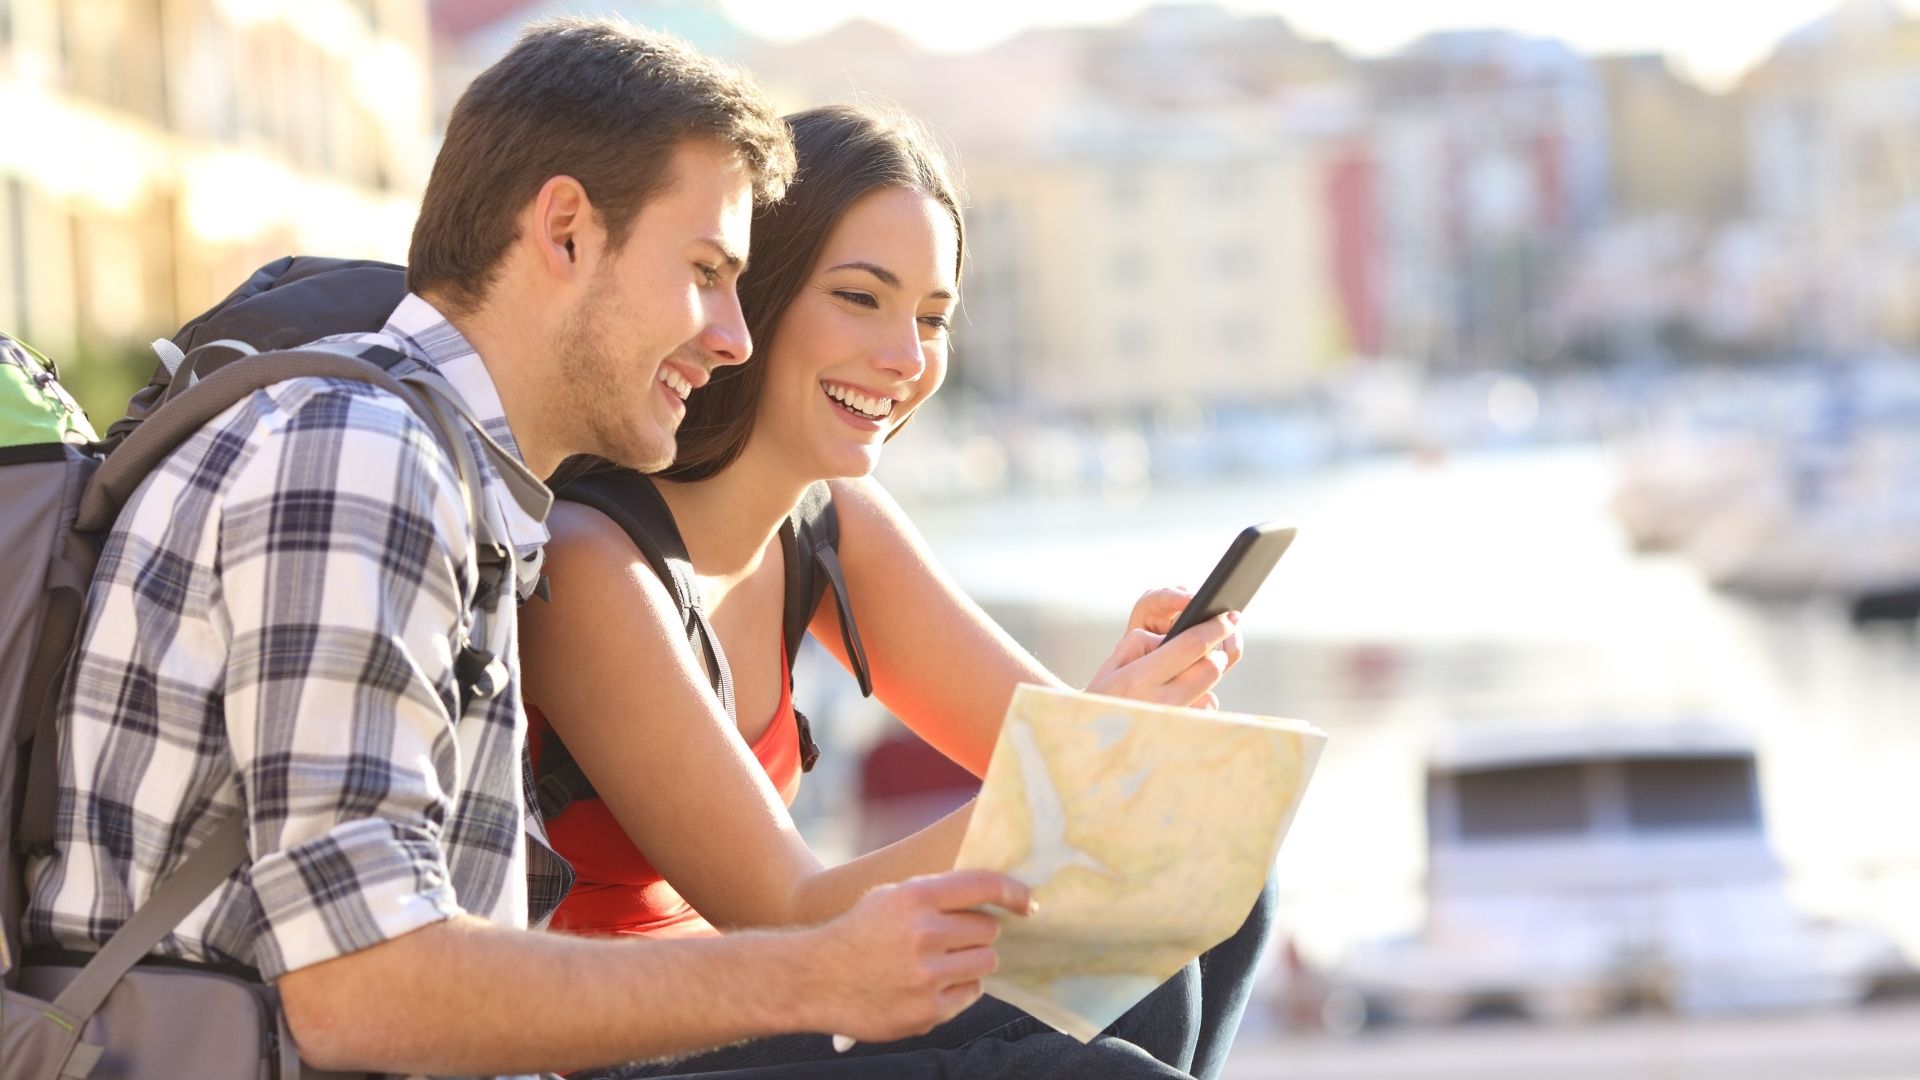 A happy traveler couple enthusiastically exploring their destination using maps and smartphones.